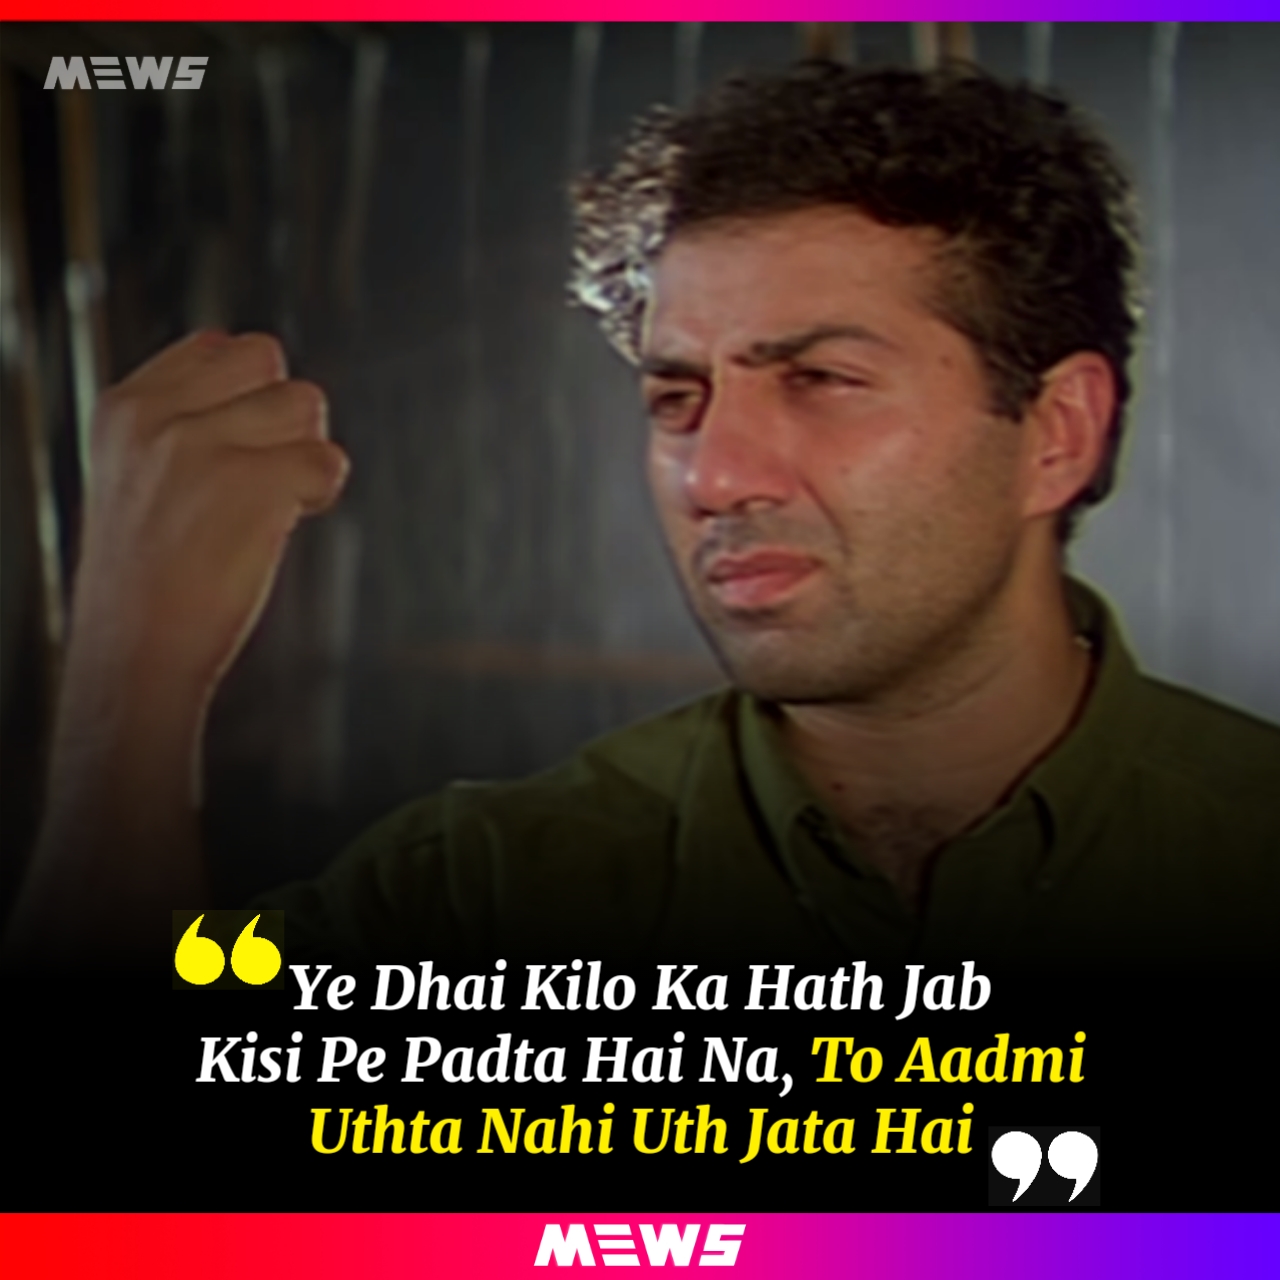 famous dialogues from Bollywood